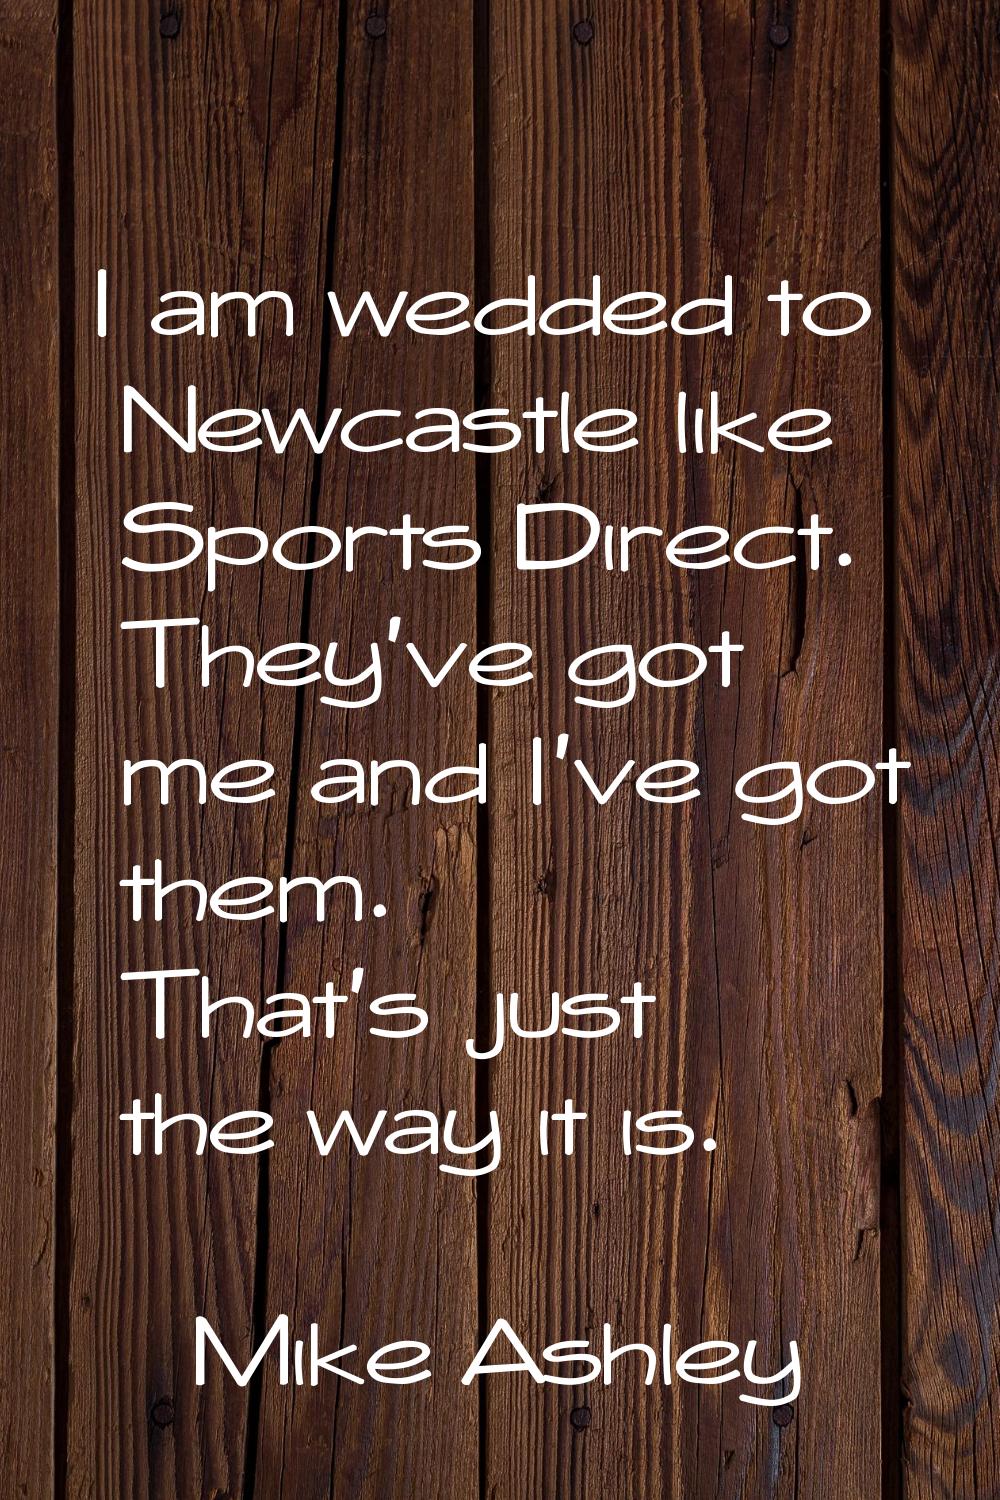 I am wedded to Newcastle like Sports Direct. They've got me and I've got them. That's just the way 